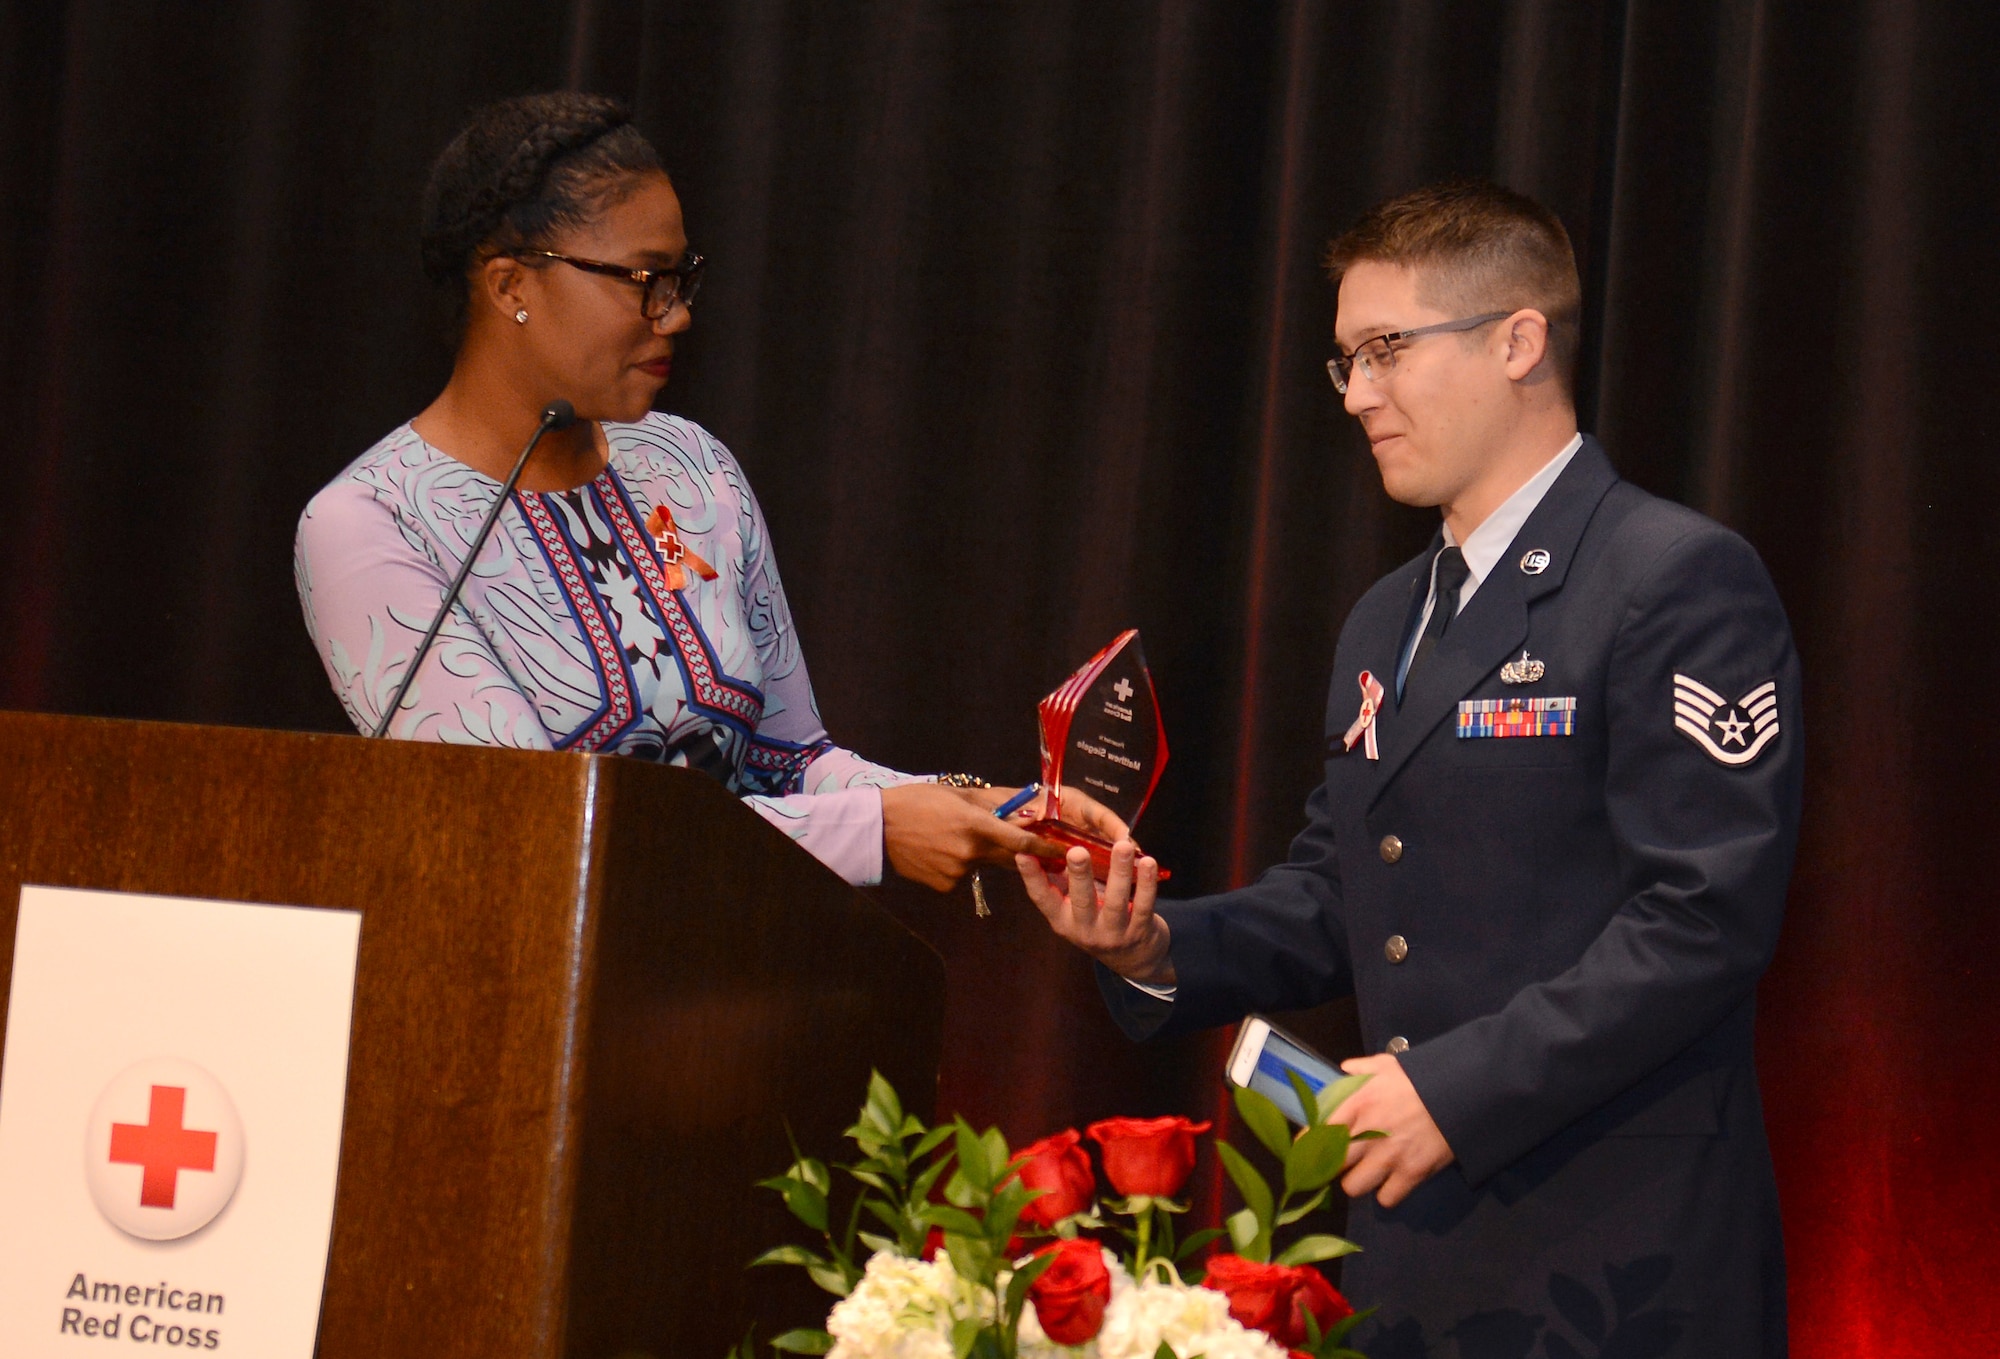 Jenna Hanchard (left), host and reporter from KING 5 TV station, presents the 2016 American Red Cross Water Rescue Hero Award to Staff Sgt. Matthew Siegele (right), 627th Force Support Squadron sports and fitness NCO in charge, during the American Red Cross 2016 Heroes luncheon Sept. 28, 2016 in Tacoma, Wash. Siegele received the 2016 Water Rescue Hero Award for the heroic act he performed on Jan. 1 when a little girl fell through the ice on Carter Lake at Joint Base Lewis-McChord, Wash. (U.S. Air Force photo/Senior Airman Divine Cox)